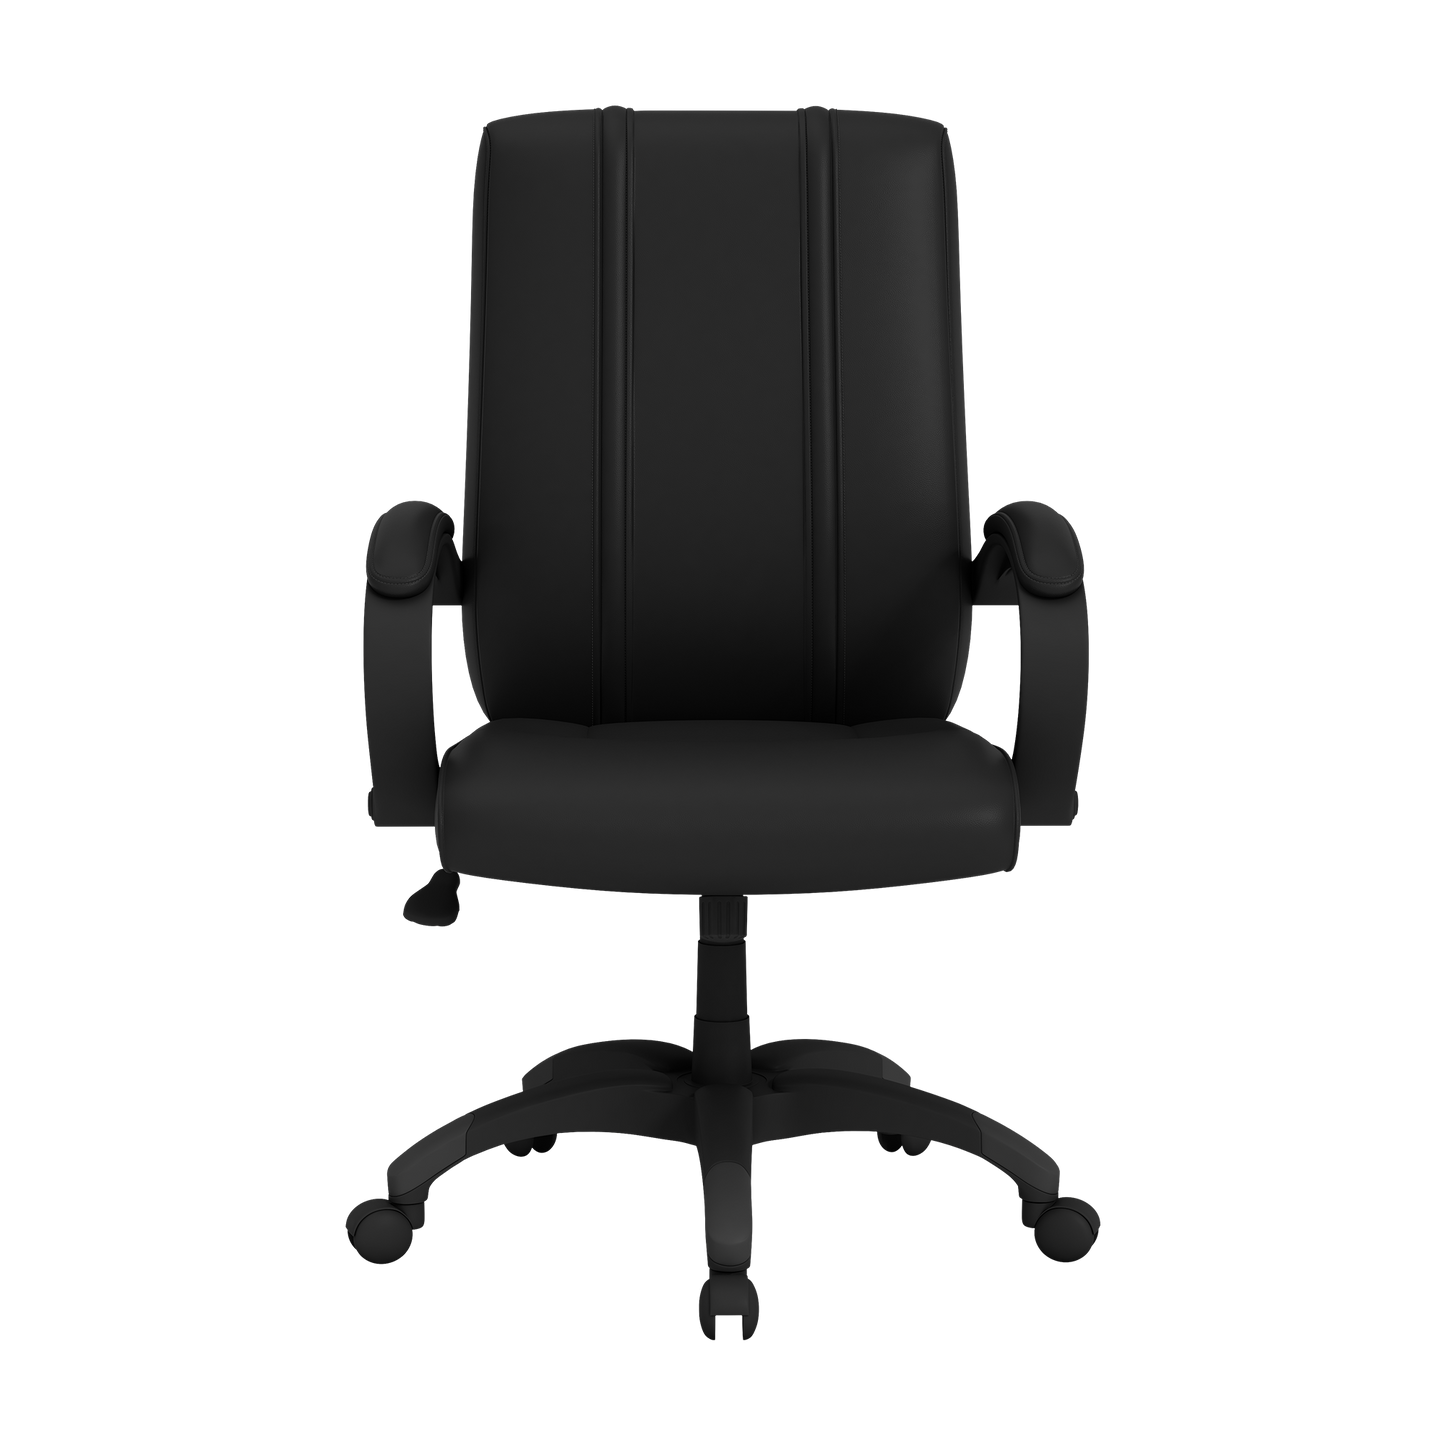 Office Chair 1000 with Seattle Mariners Secondary